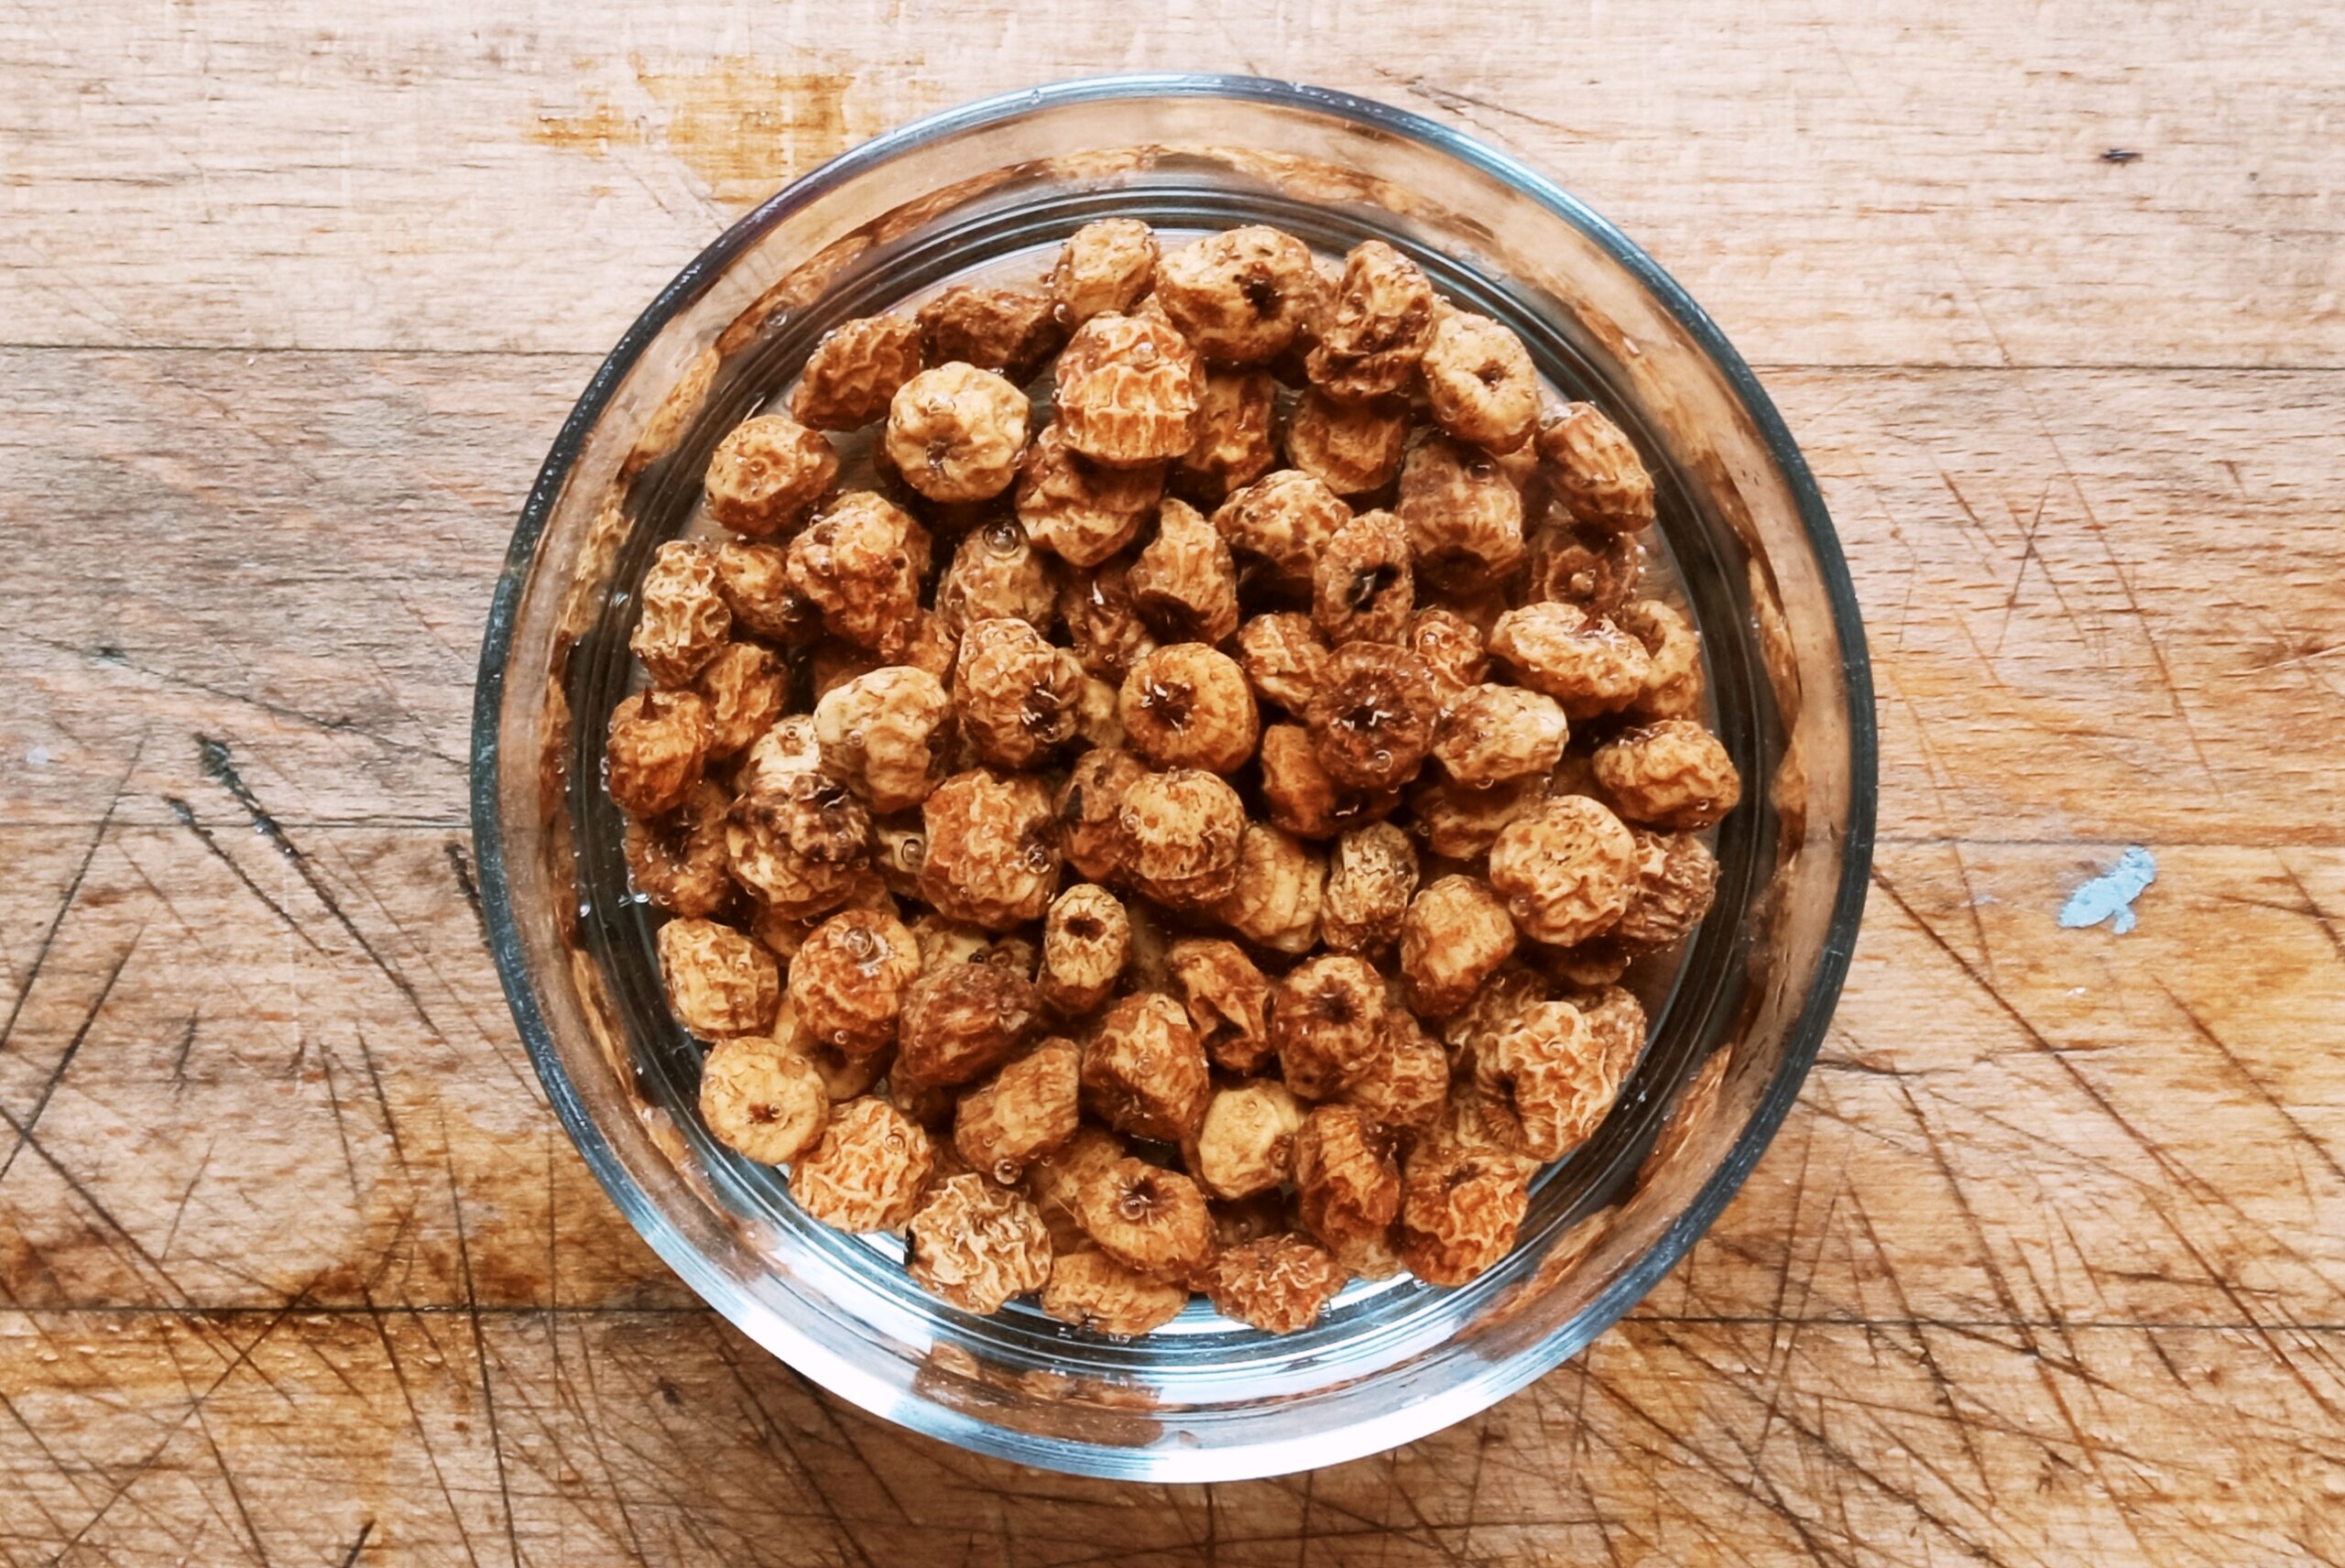 Tiger Nuts: The Gut-Healthy Snack Powering Our Bars